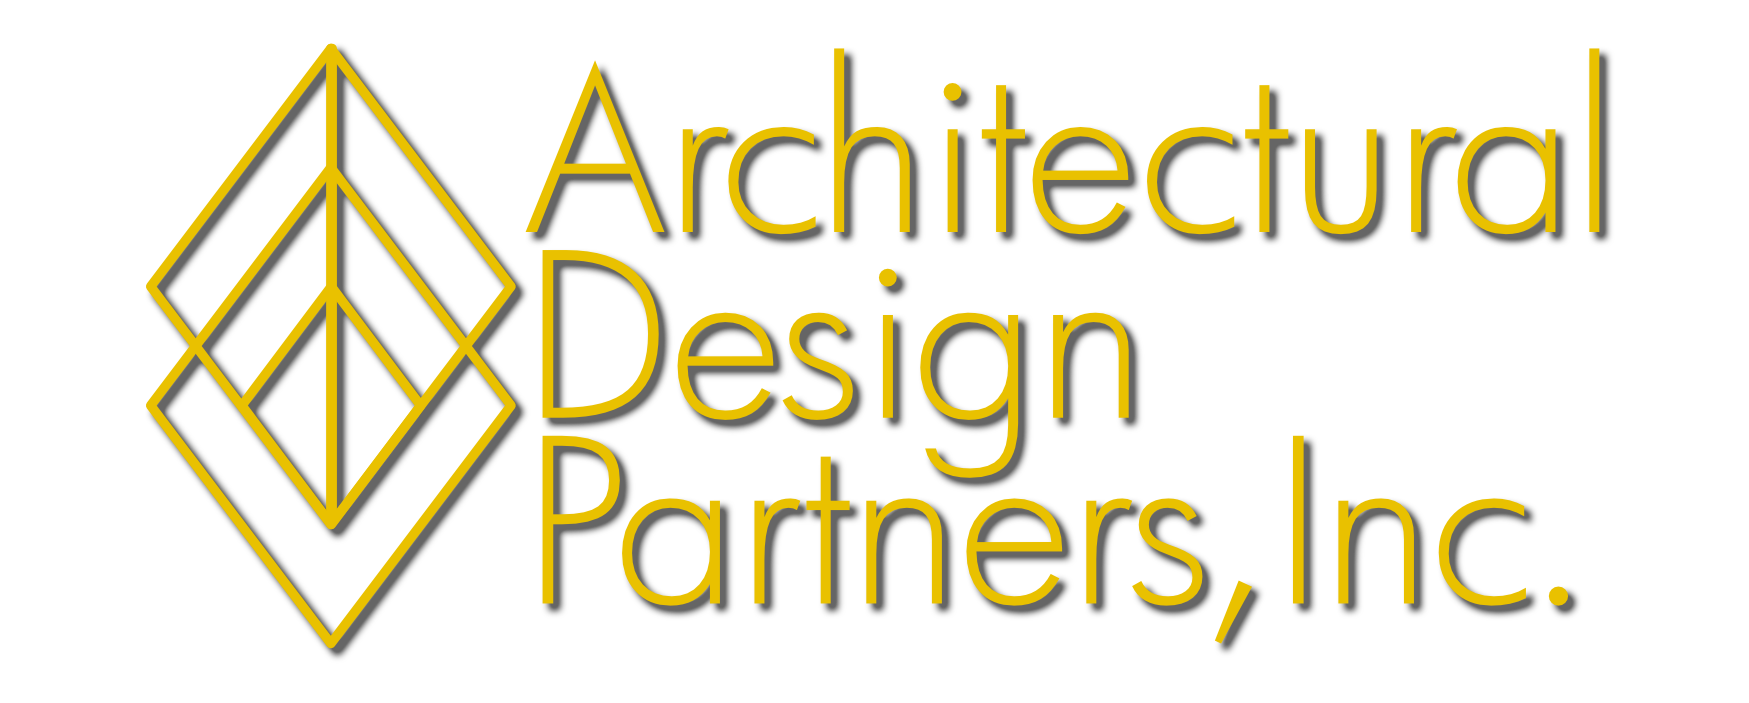 Architectural Design Partners Inc | A Professional Central Florida Architectural Design Firm